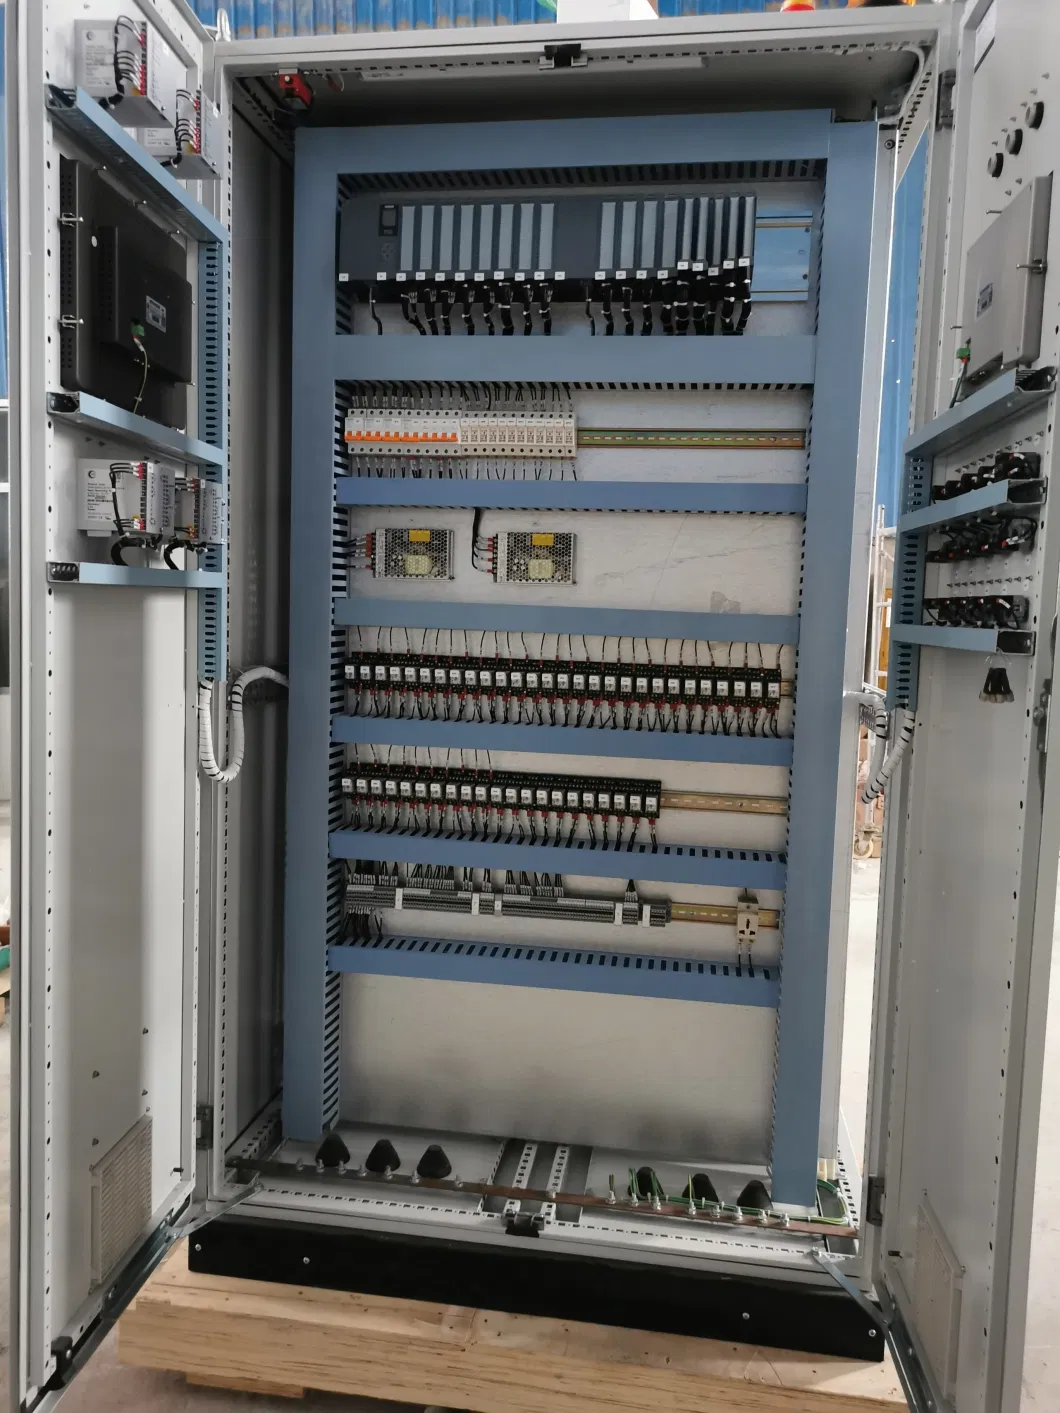 PLC Control Panel - PLC Programming for Industrial Automation